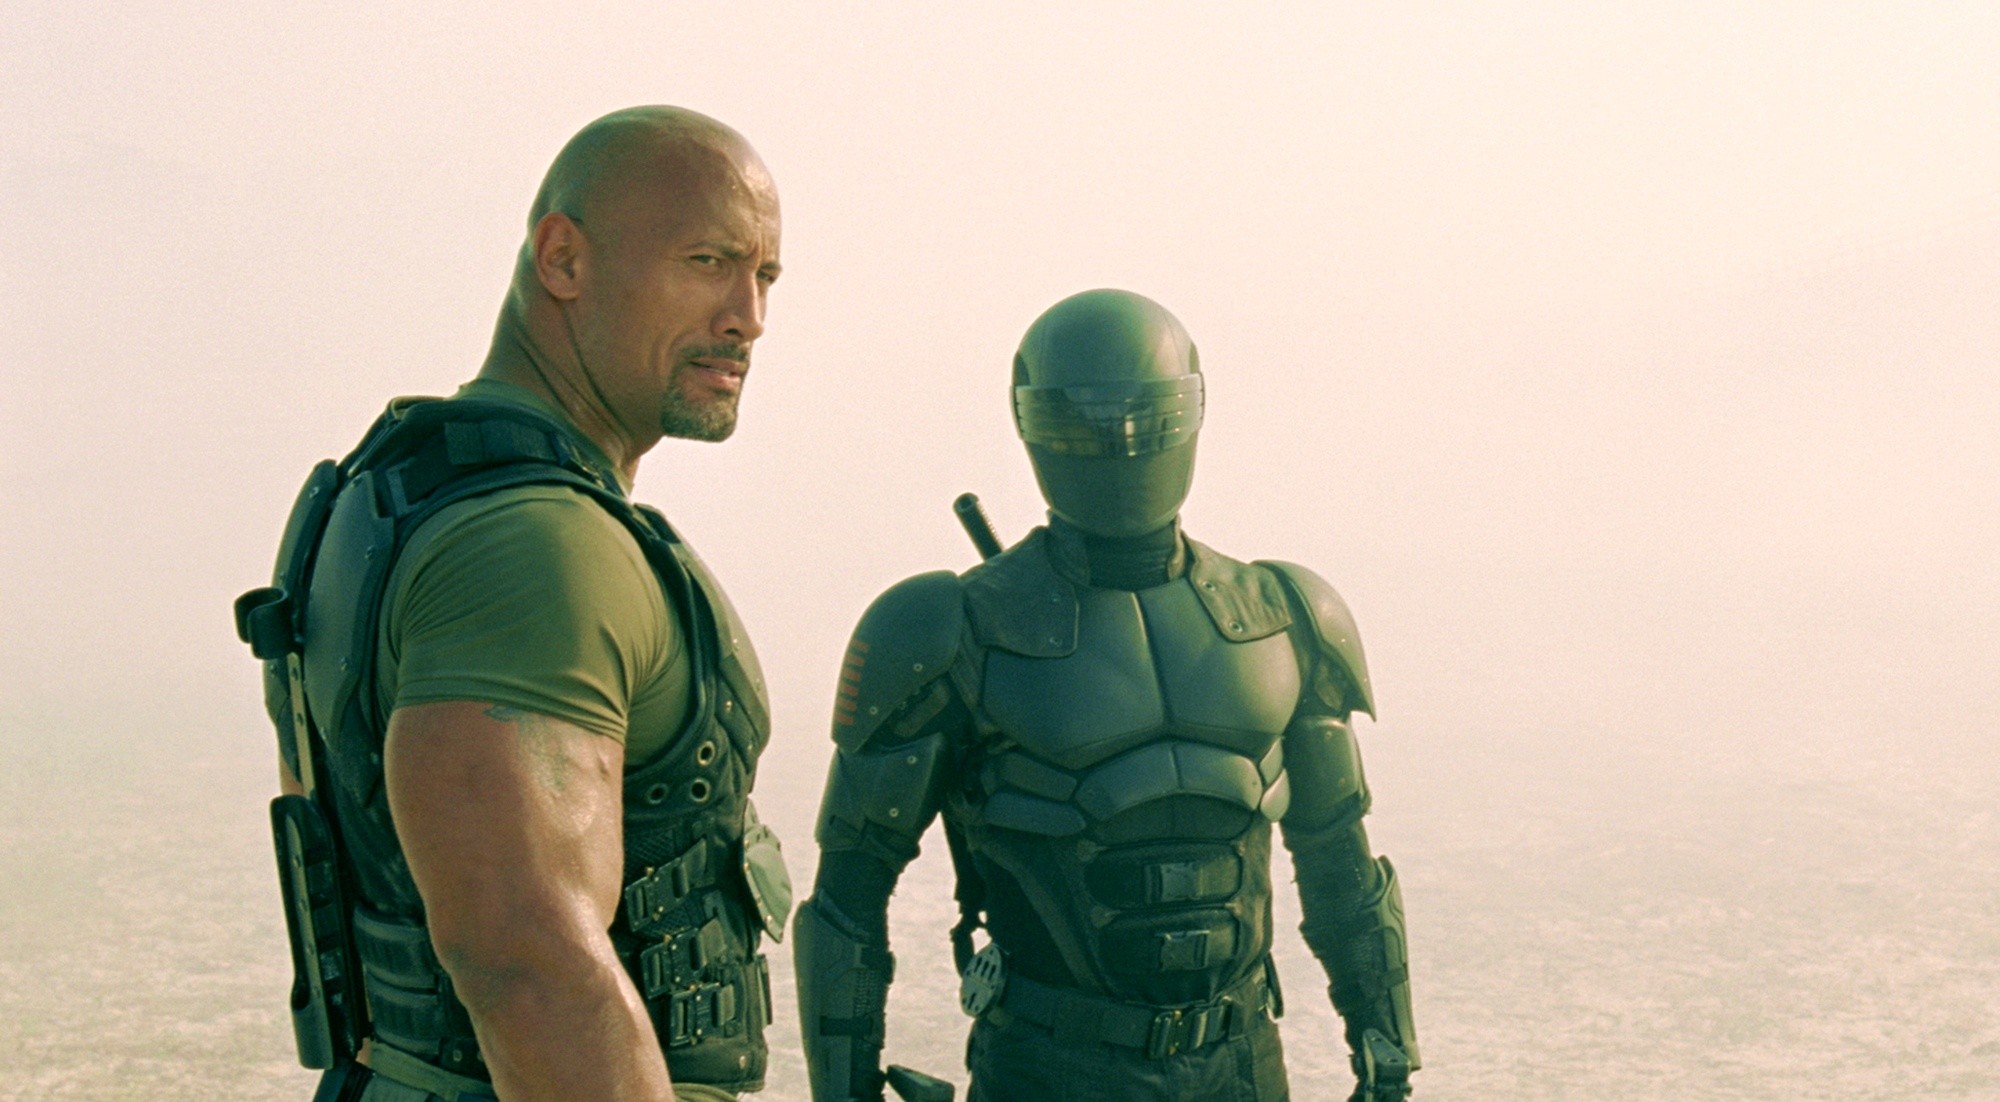 The Rock stars as Roadblock and Snake Eyes in Paramount Pictures' G.I. Joe: Retaliation (2013)